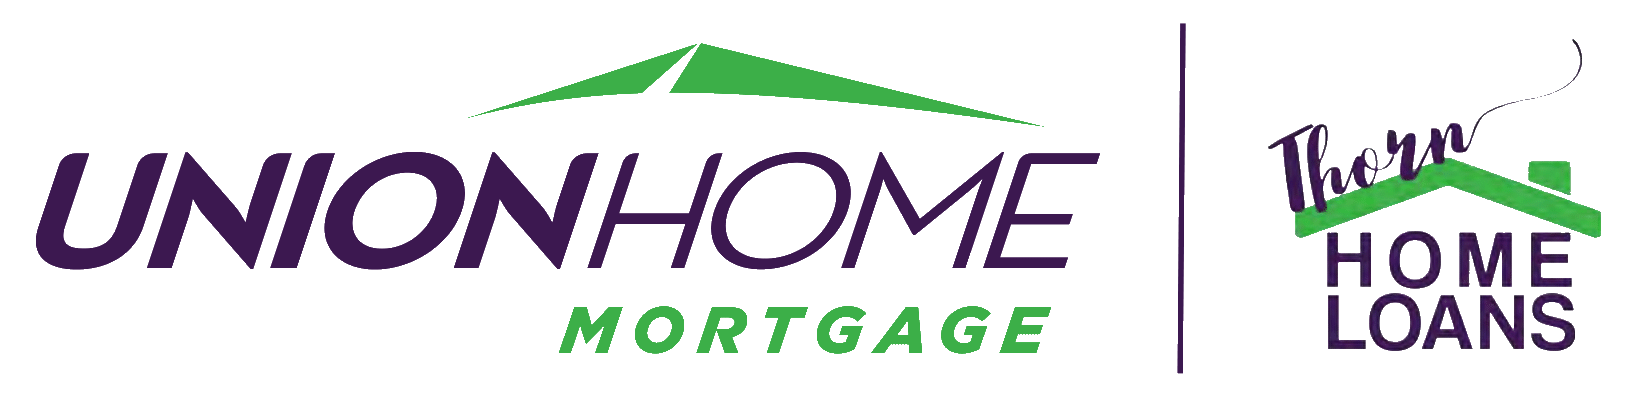 Thorn Home Loans - Union Home Mortgage